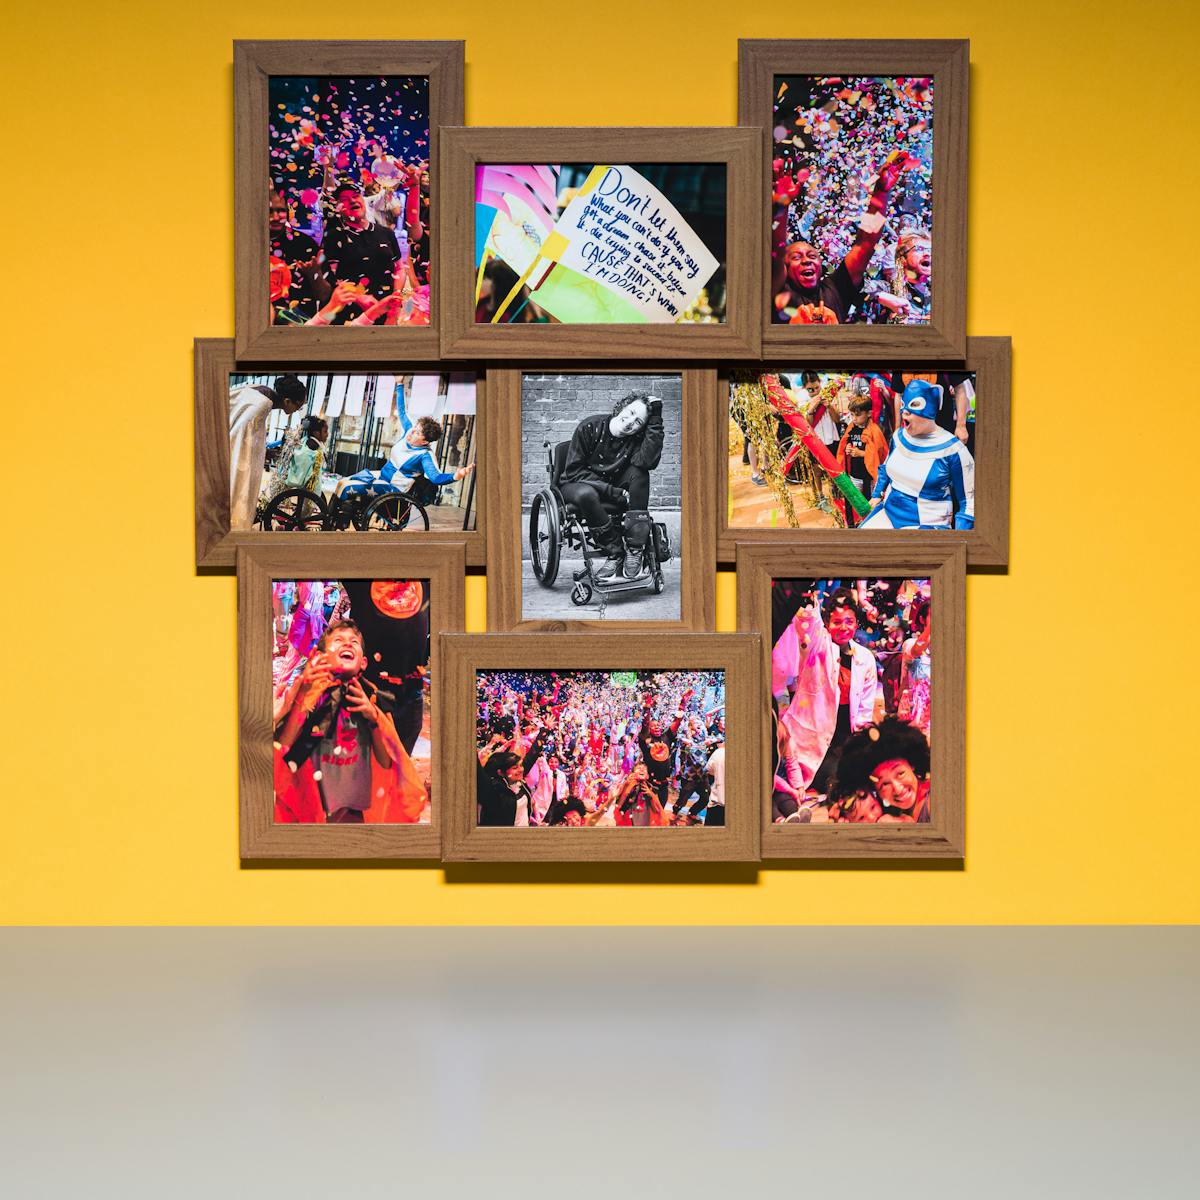 Photograph of a multiframe photo frame containing nine photographs, one in black and white and eight in colour. The frame is hung on a yellow wall above a grey tabletop.